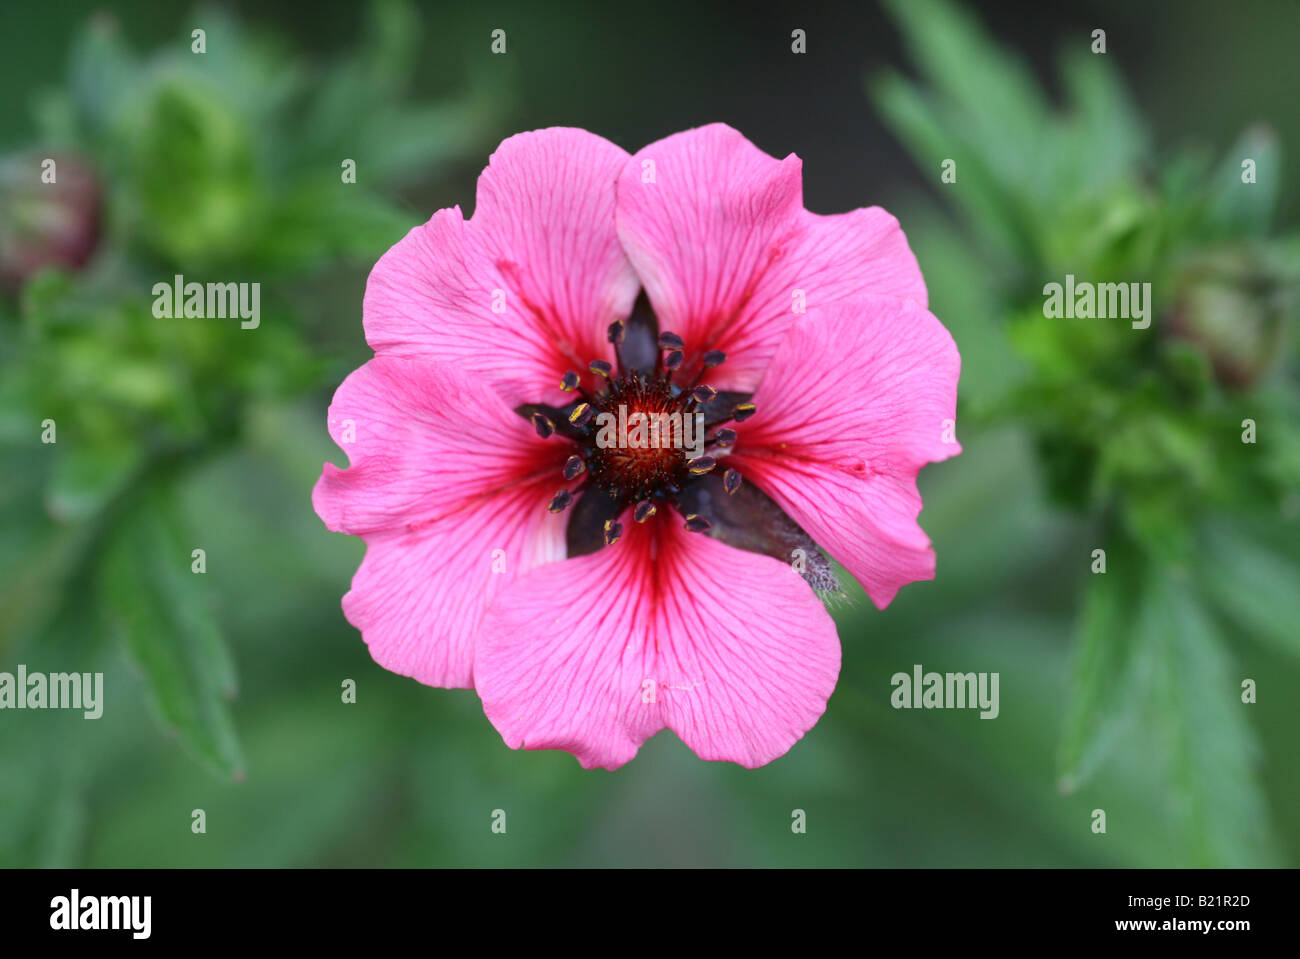 A close up of a Potentilla flower Stock Photo